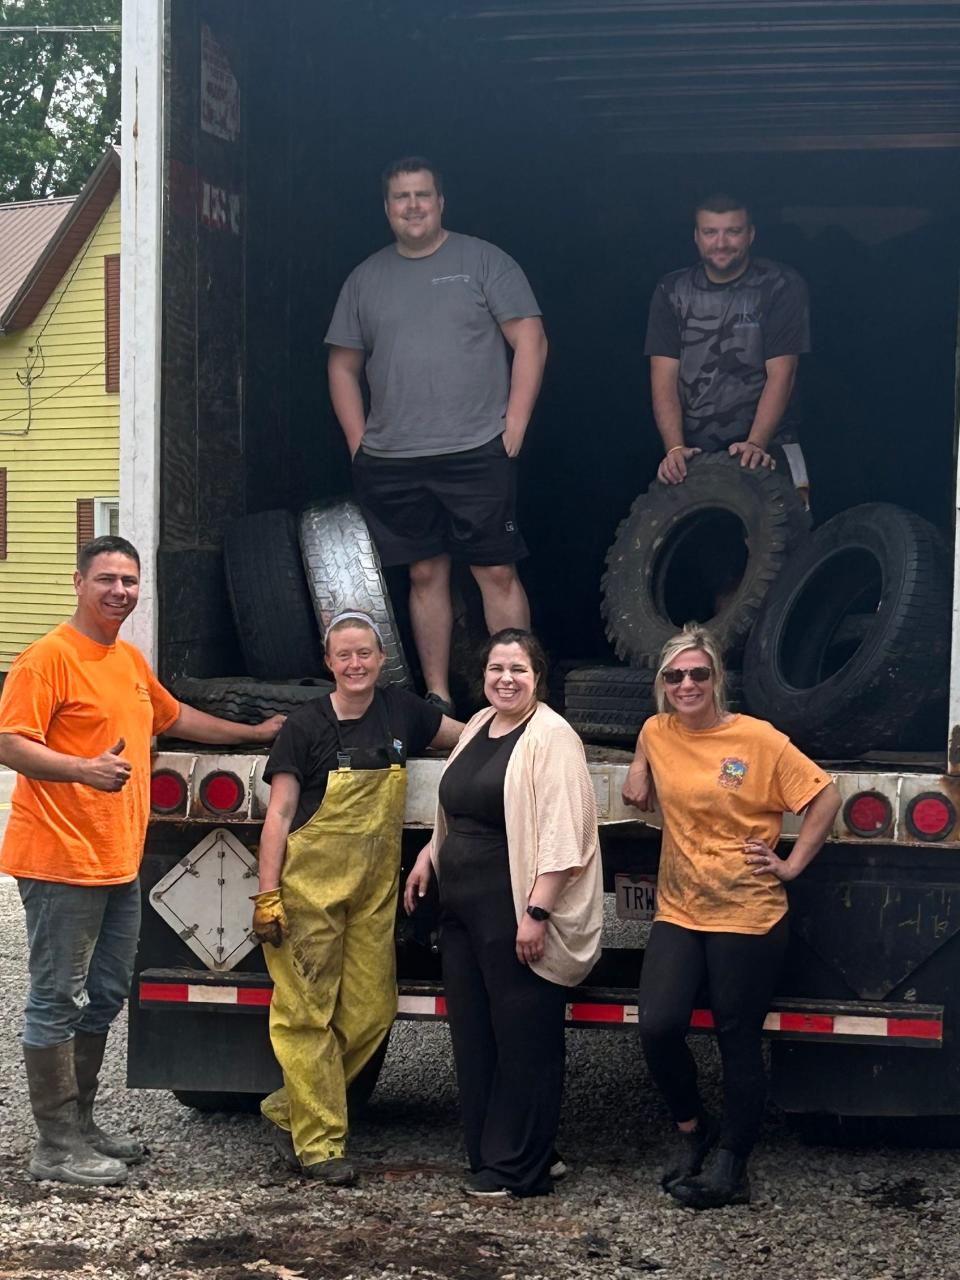 People from the Village of Thurston and the Fairfield County Health Department loaded up the tires recently collected from around the county and dropped off in the village.